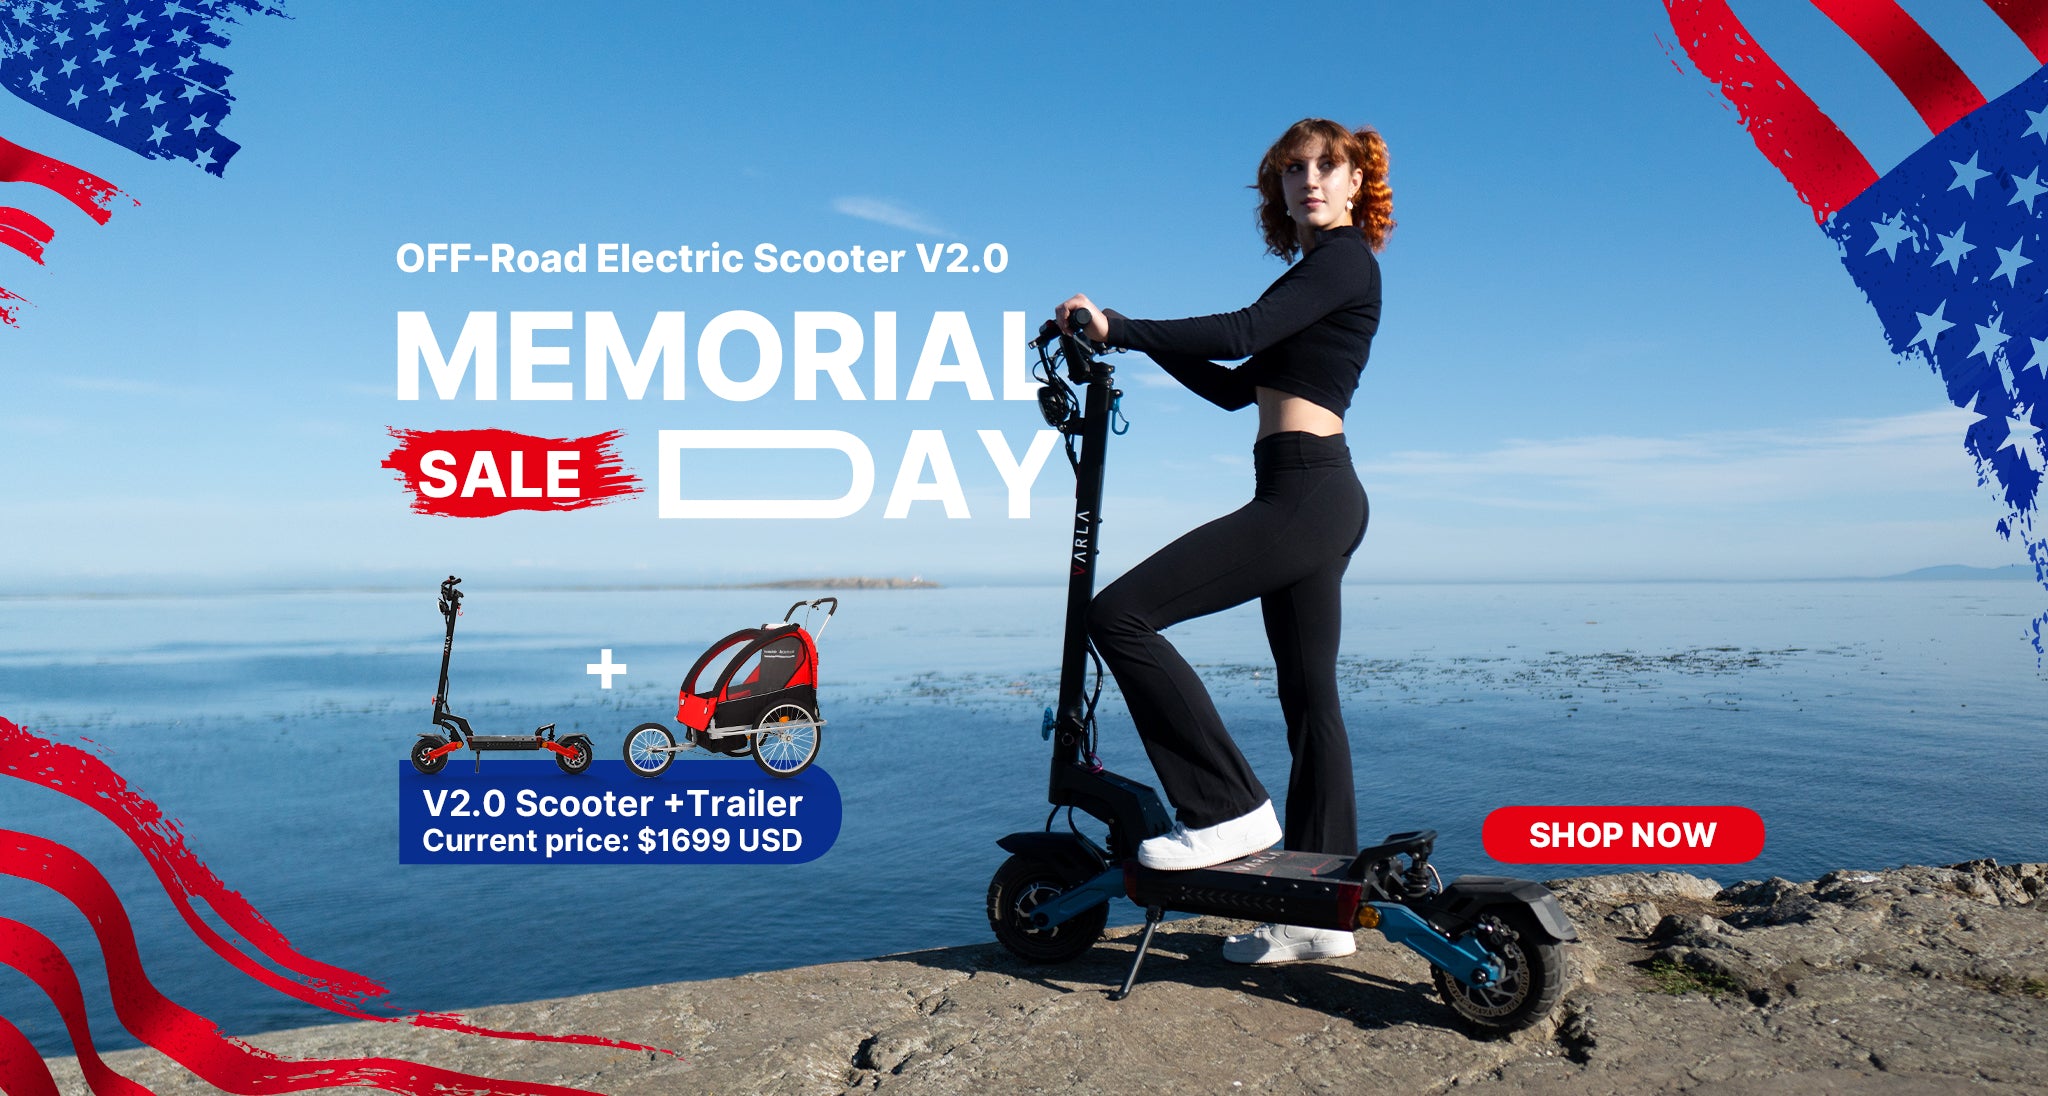 Varla Eagle One V2.0 Powerful Off-road Electric Scooter